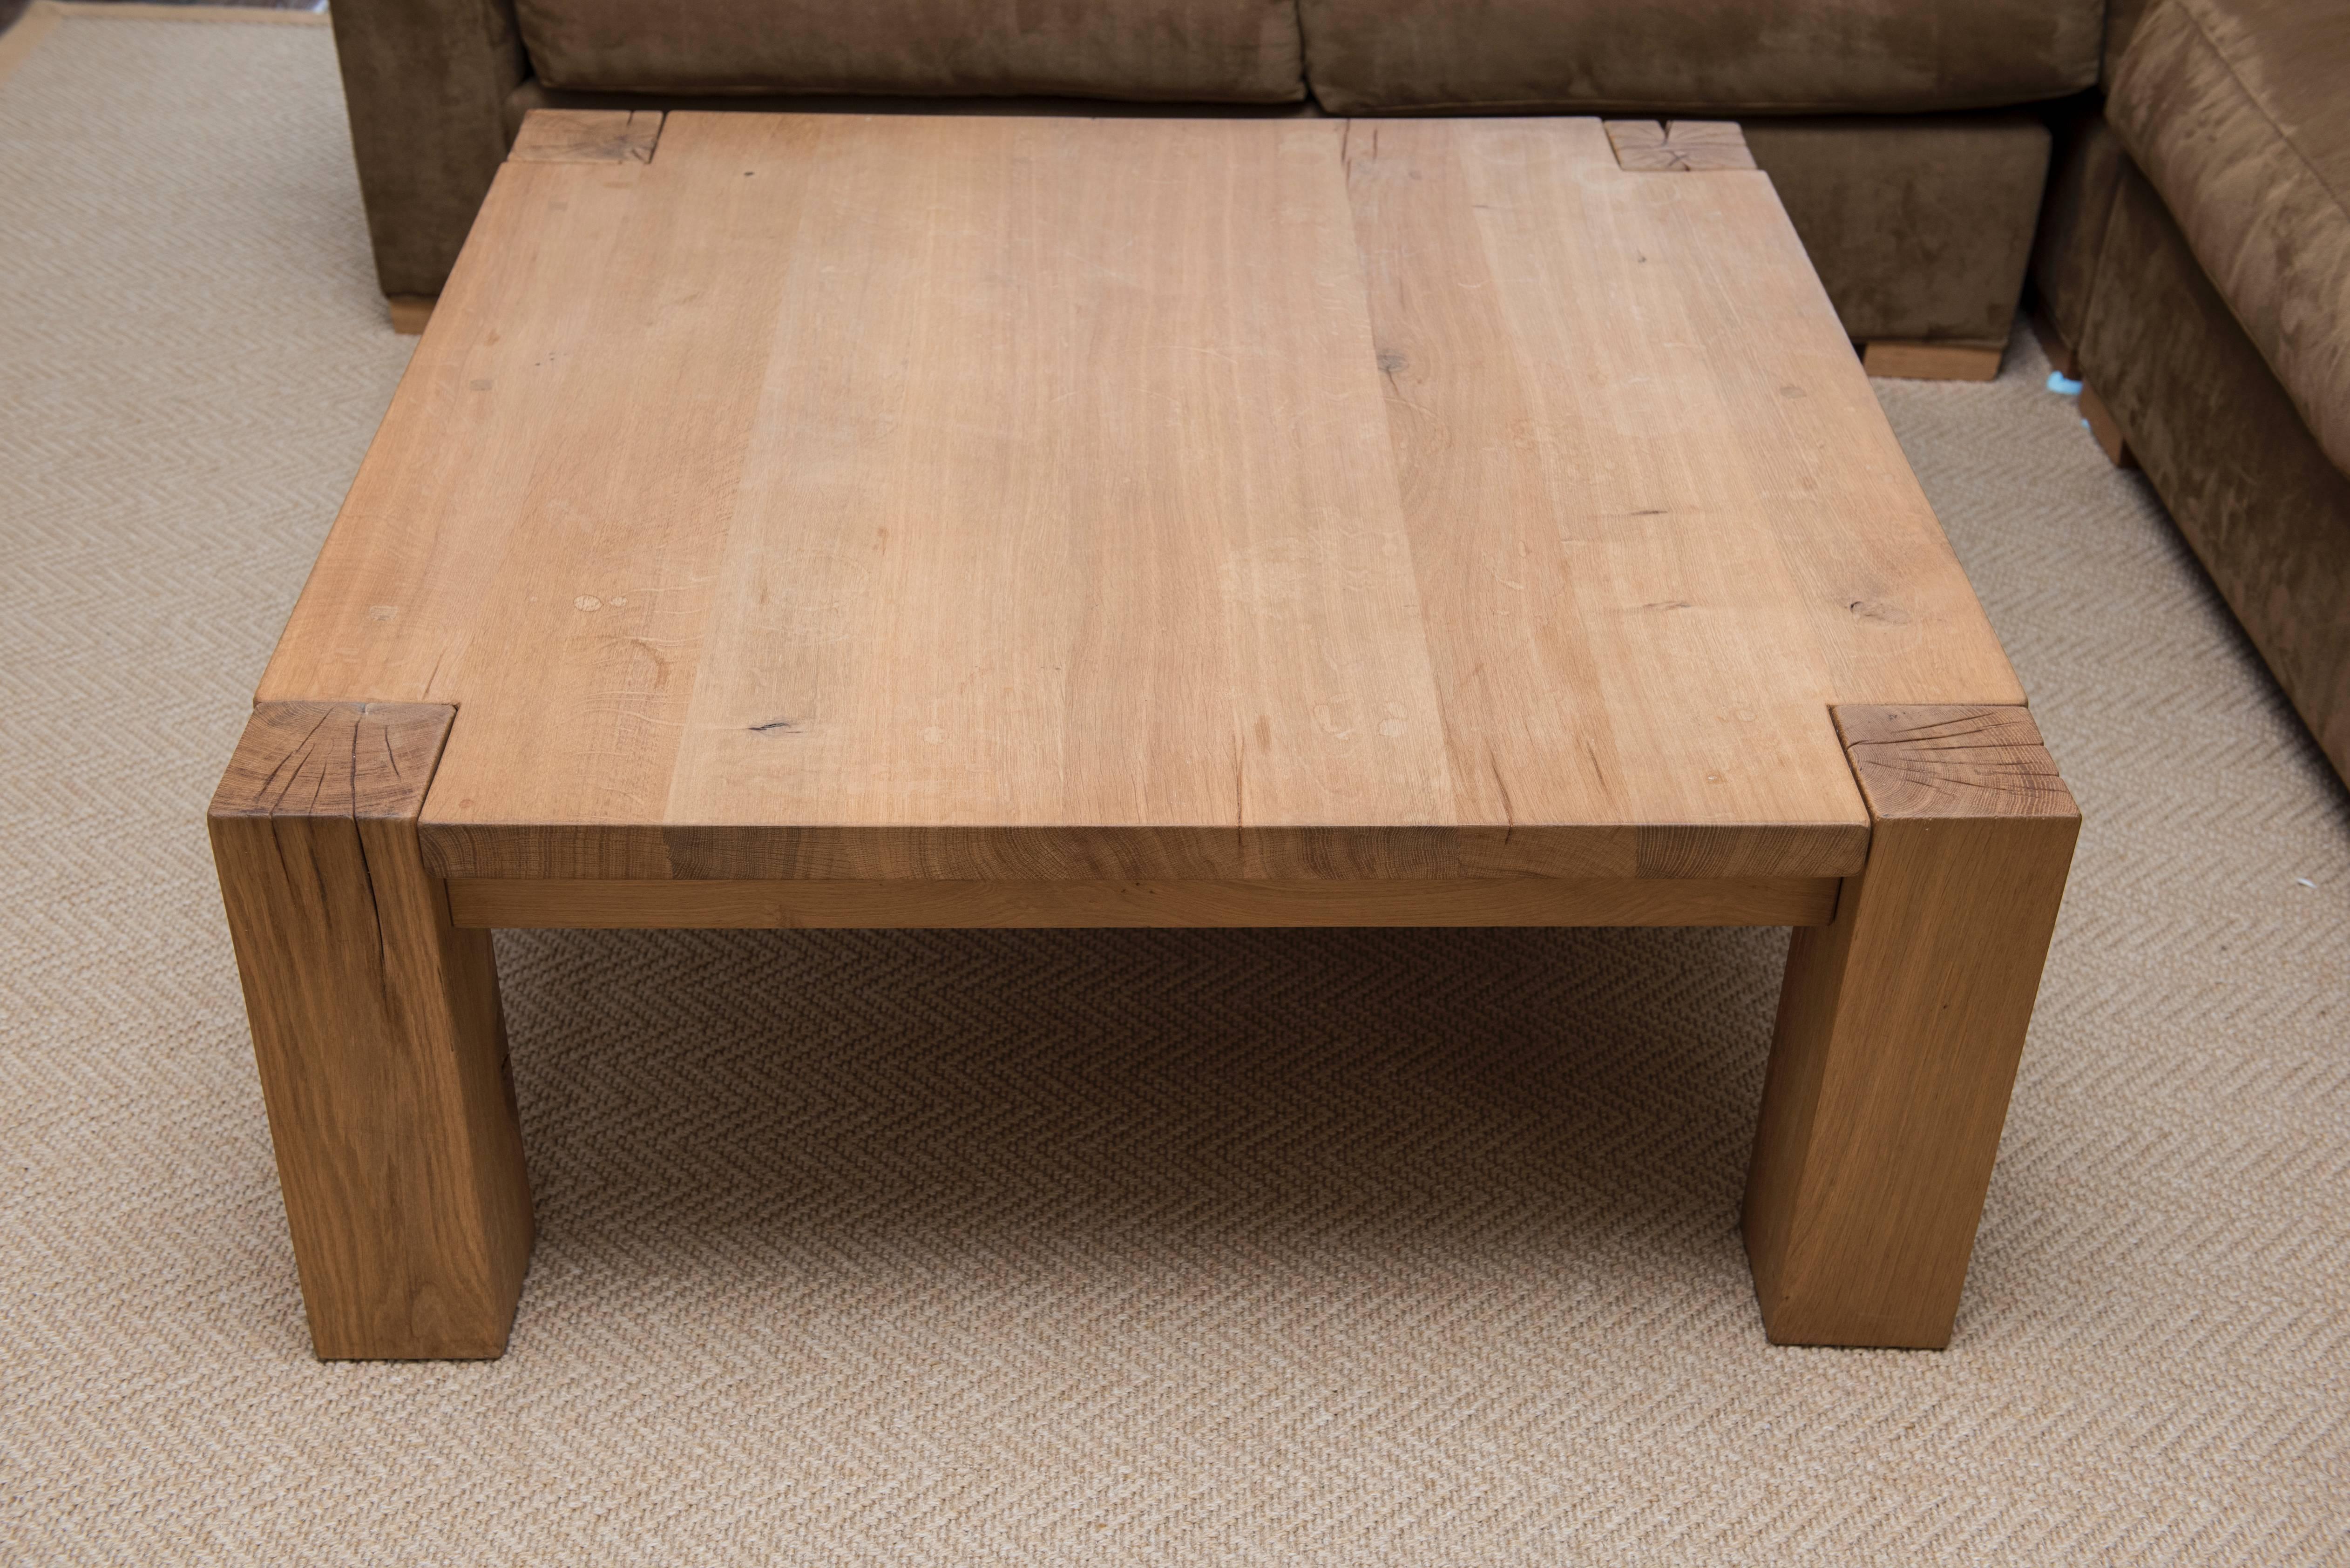 Oak Coffee Table In Excellent Condition For Sale In Southampton, NY